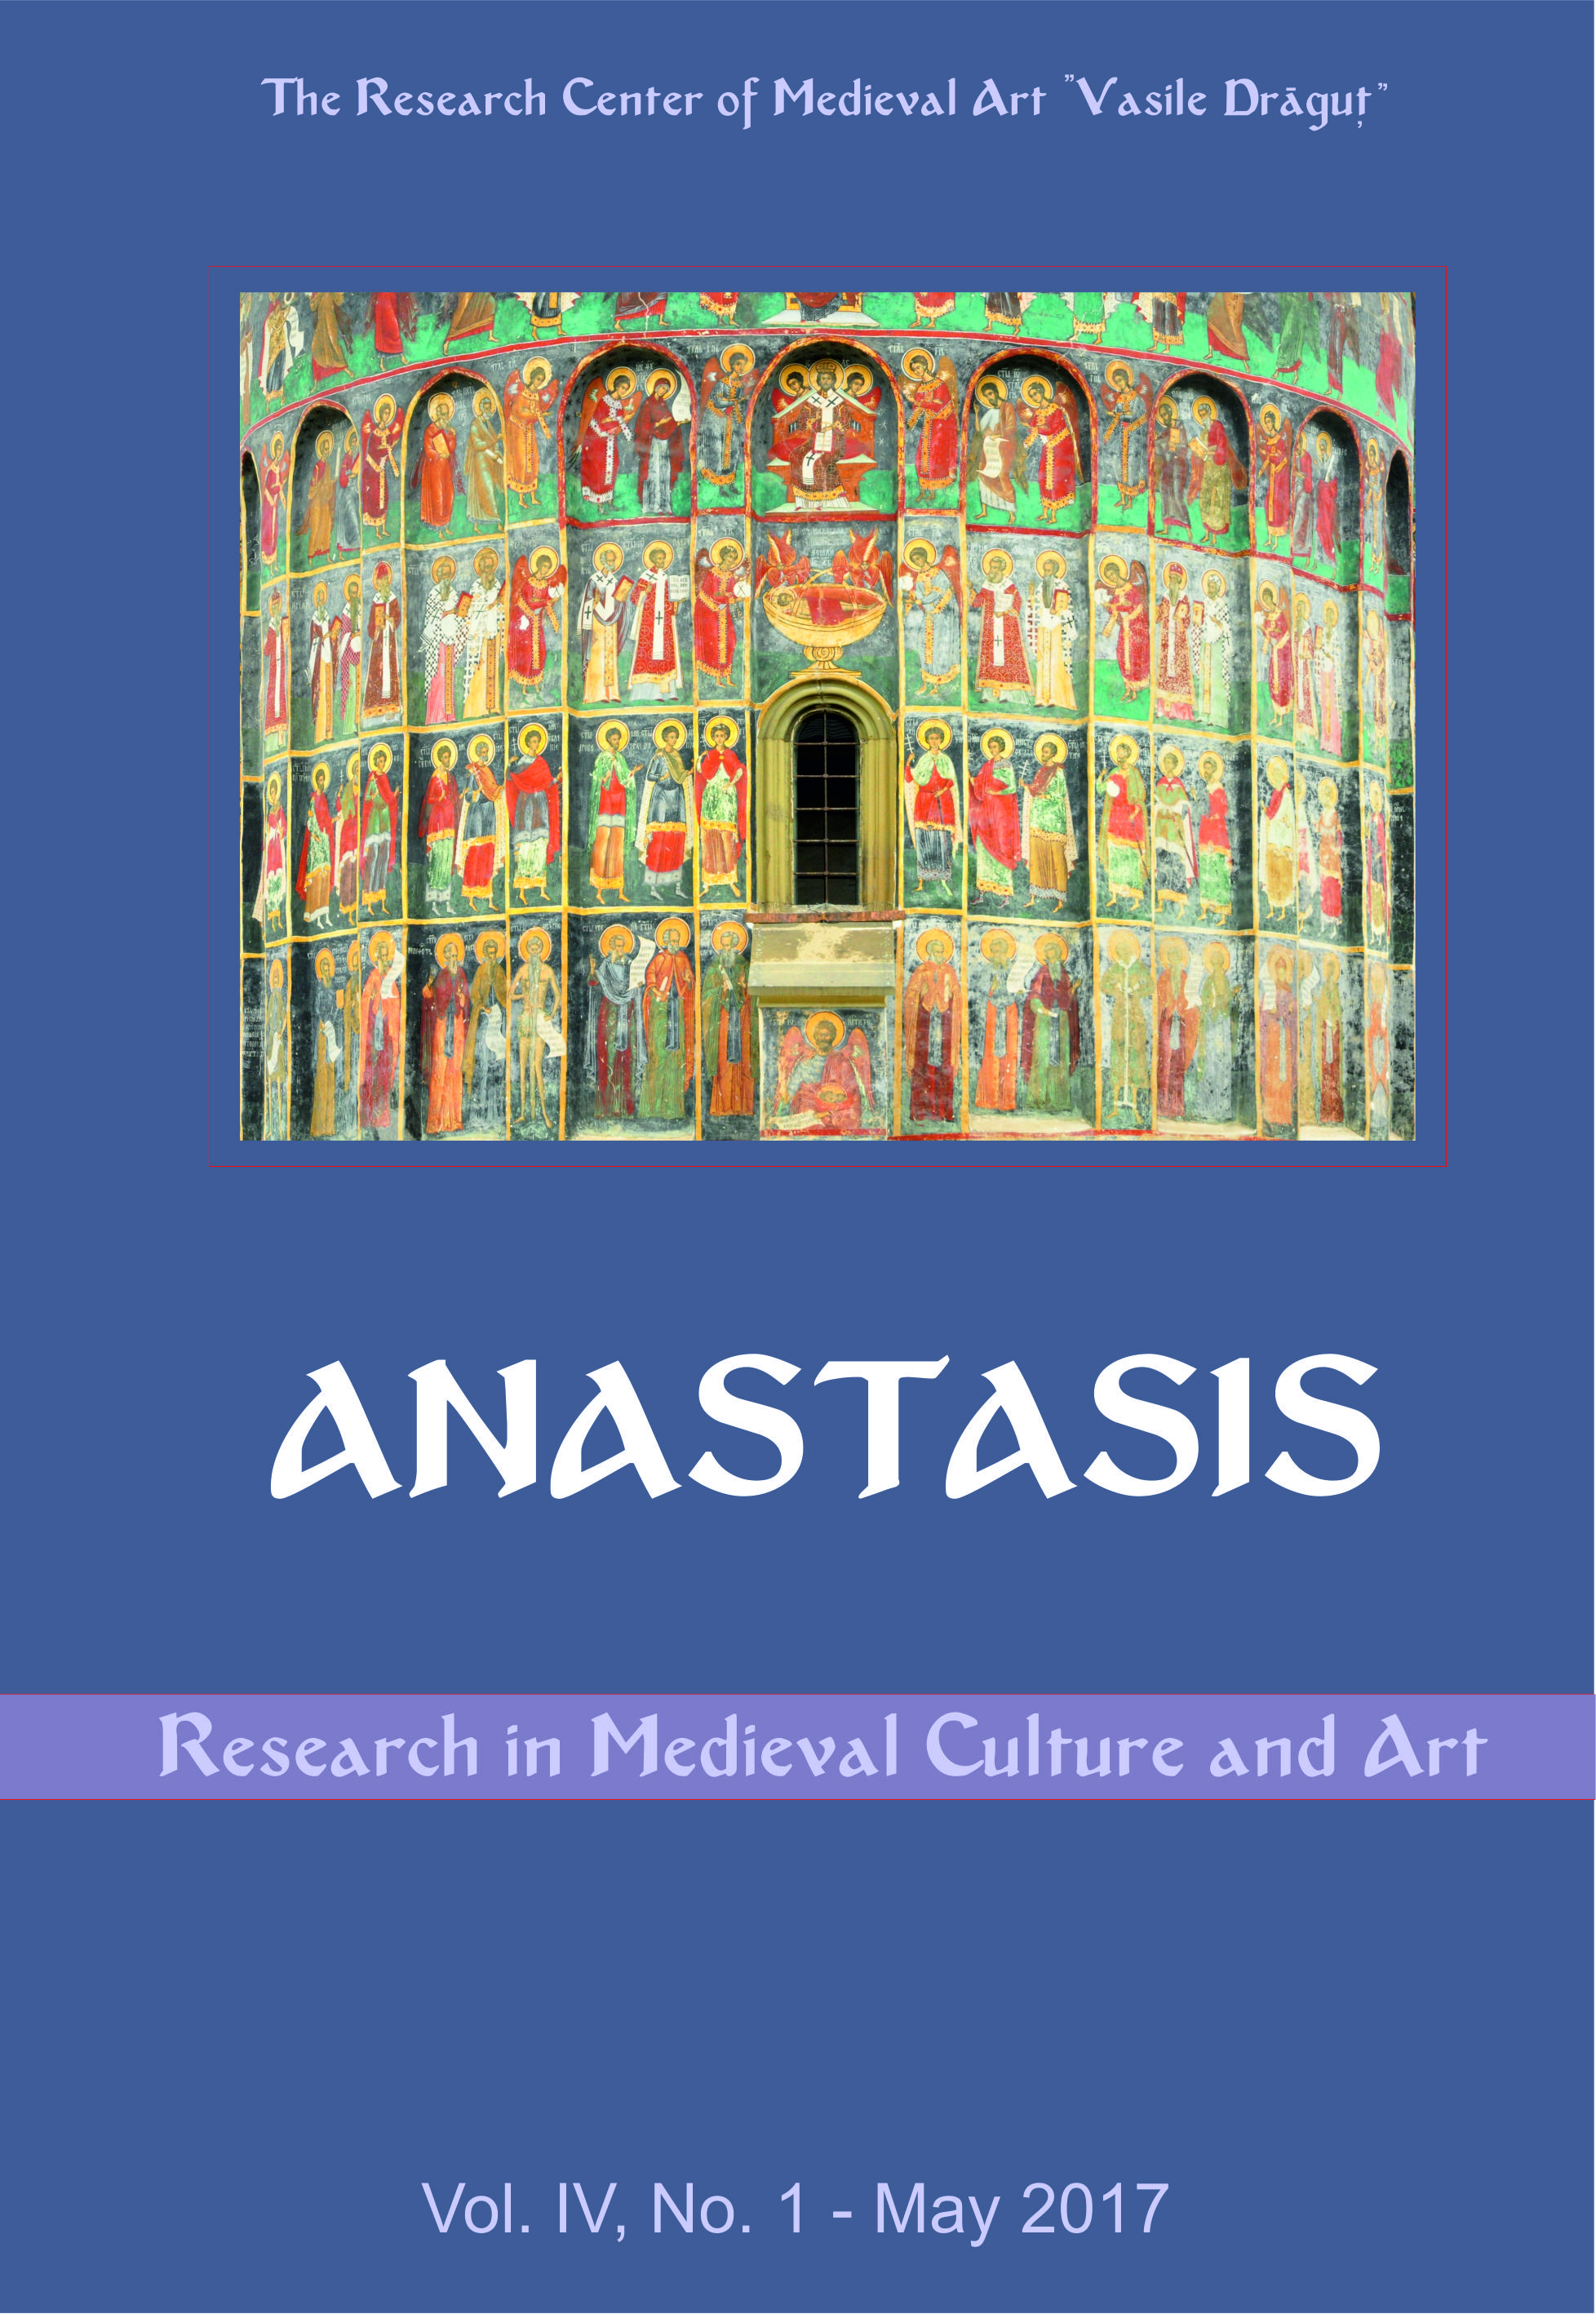 Hiding - Revealing: The Annunciation and Nativity of Christ in the Paintings of Moldavia. A Possible Reading Cover Image